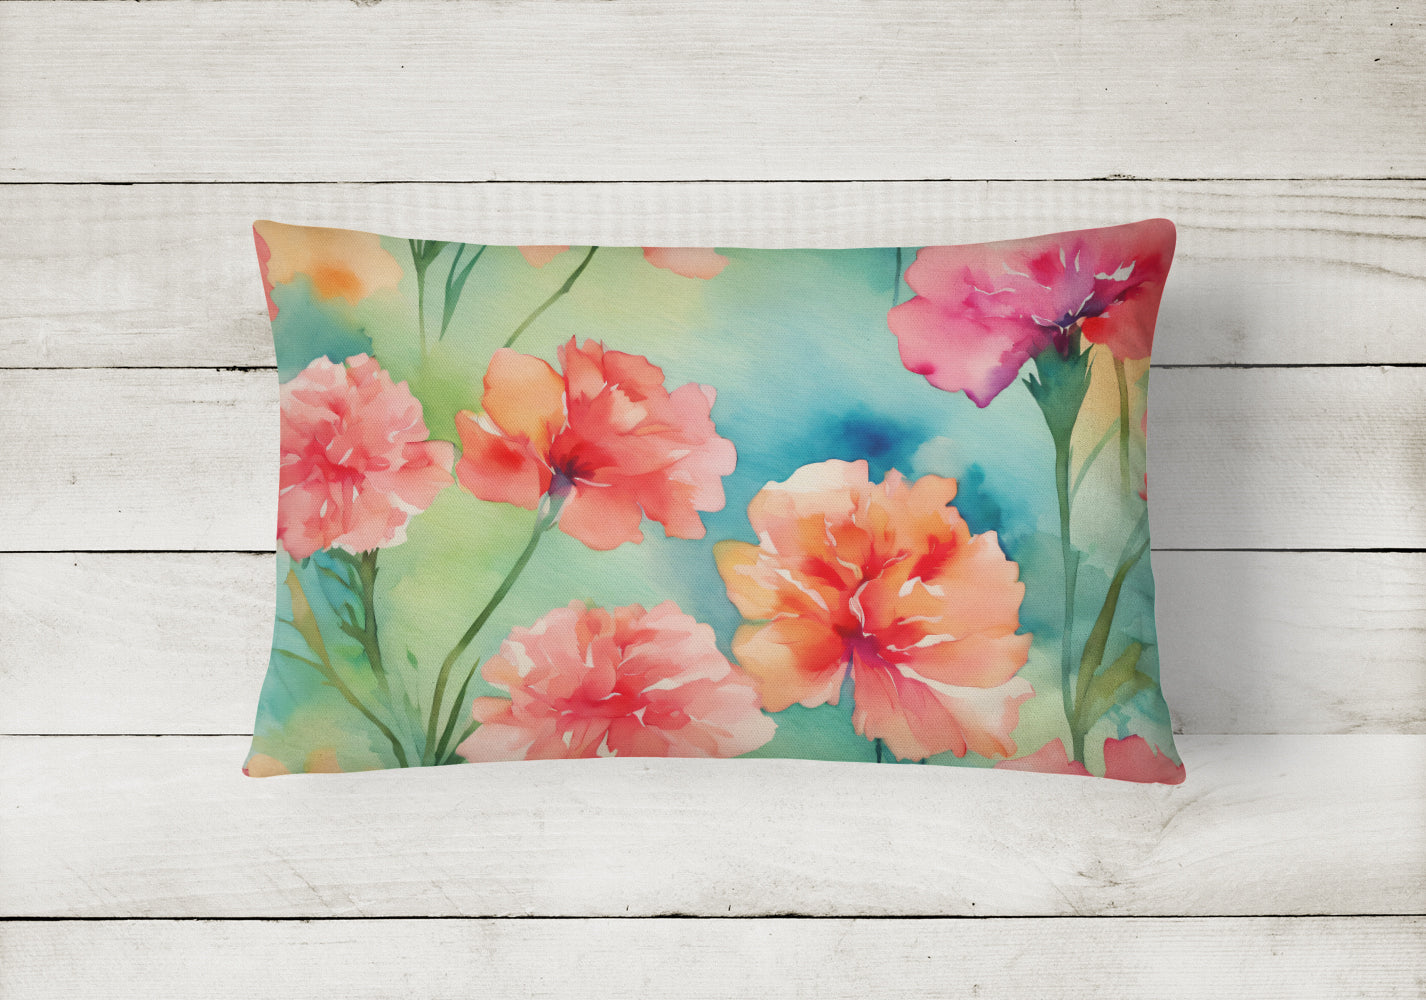 Buy this Carnations in Watercolor Fabric Decorative Pillow